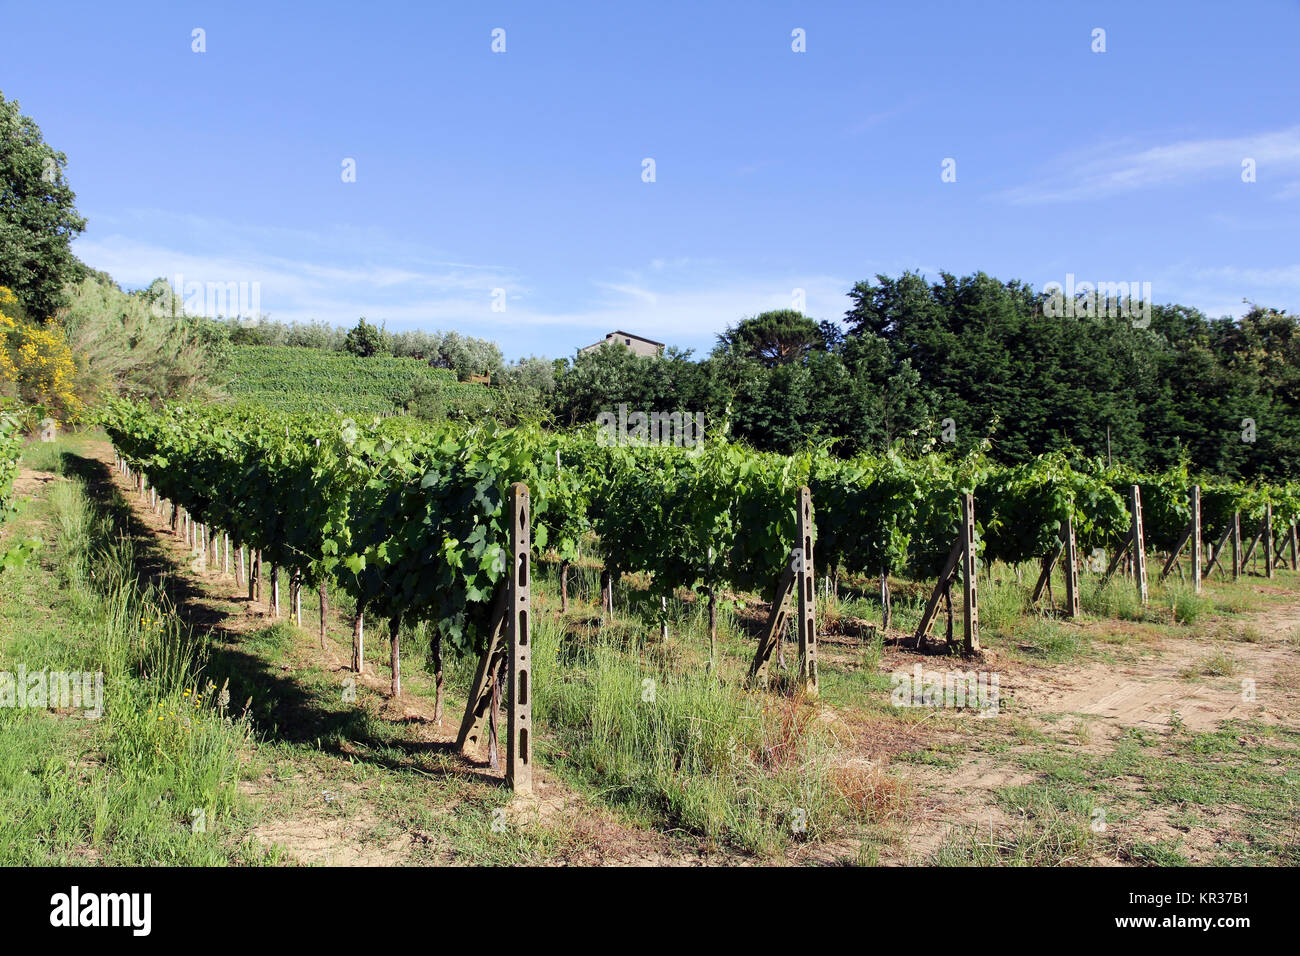 vineyards with vines in tuscany in italy Stock Photo